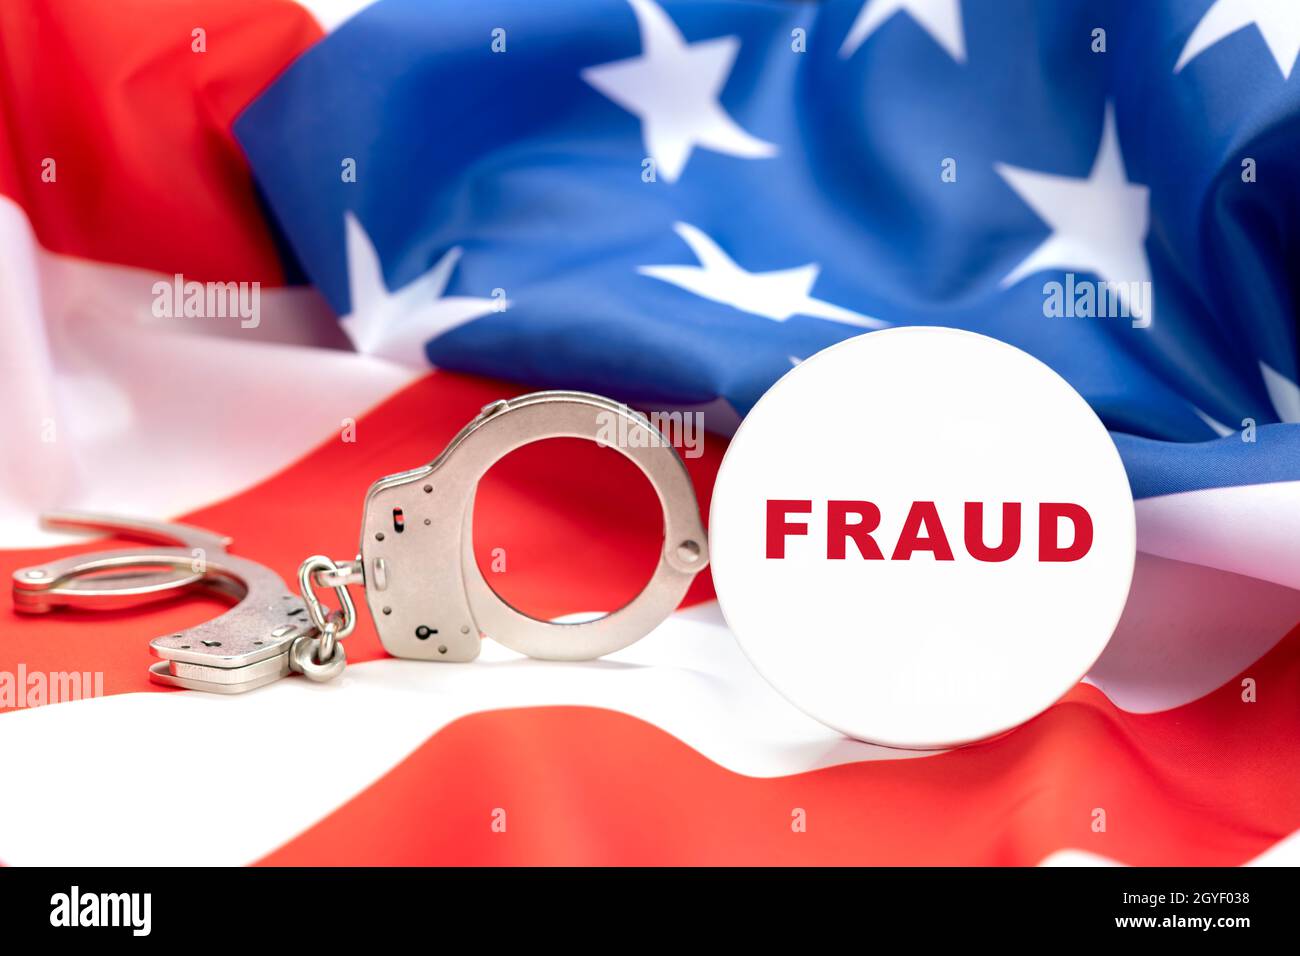 Images depicts a fraud button against handcuffs and the American flag, insinuating that fraud is a crime and those cheating people will be arrested. Stock Photo